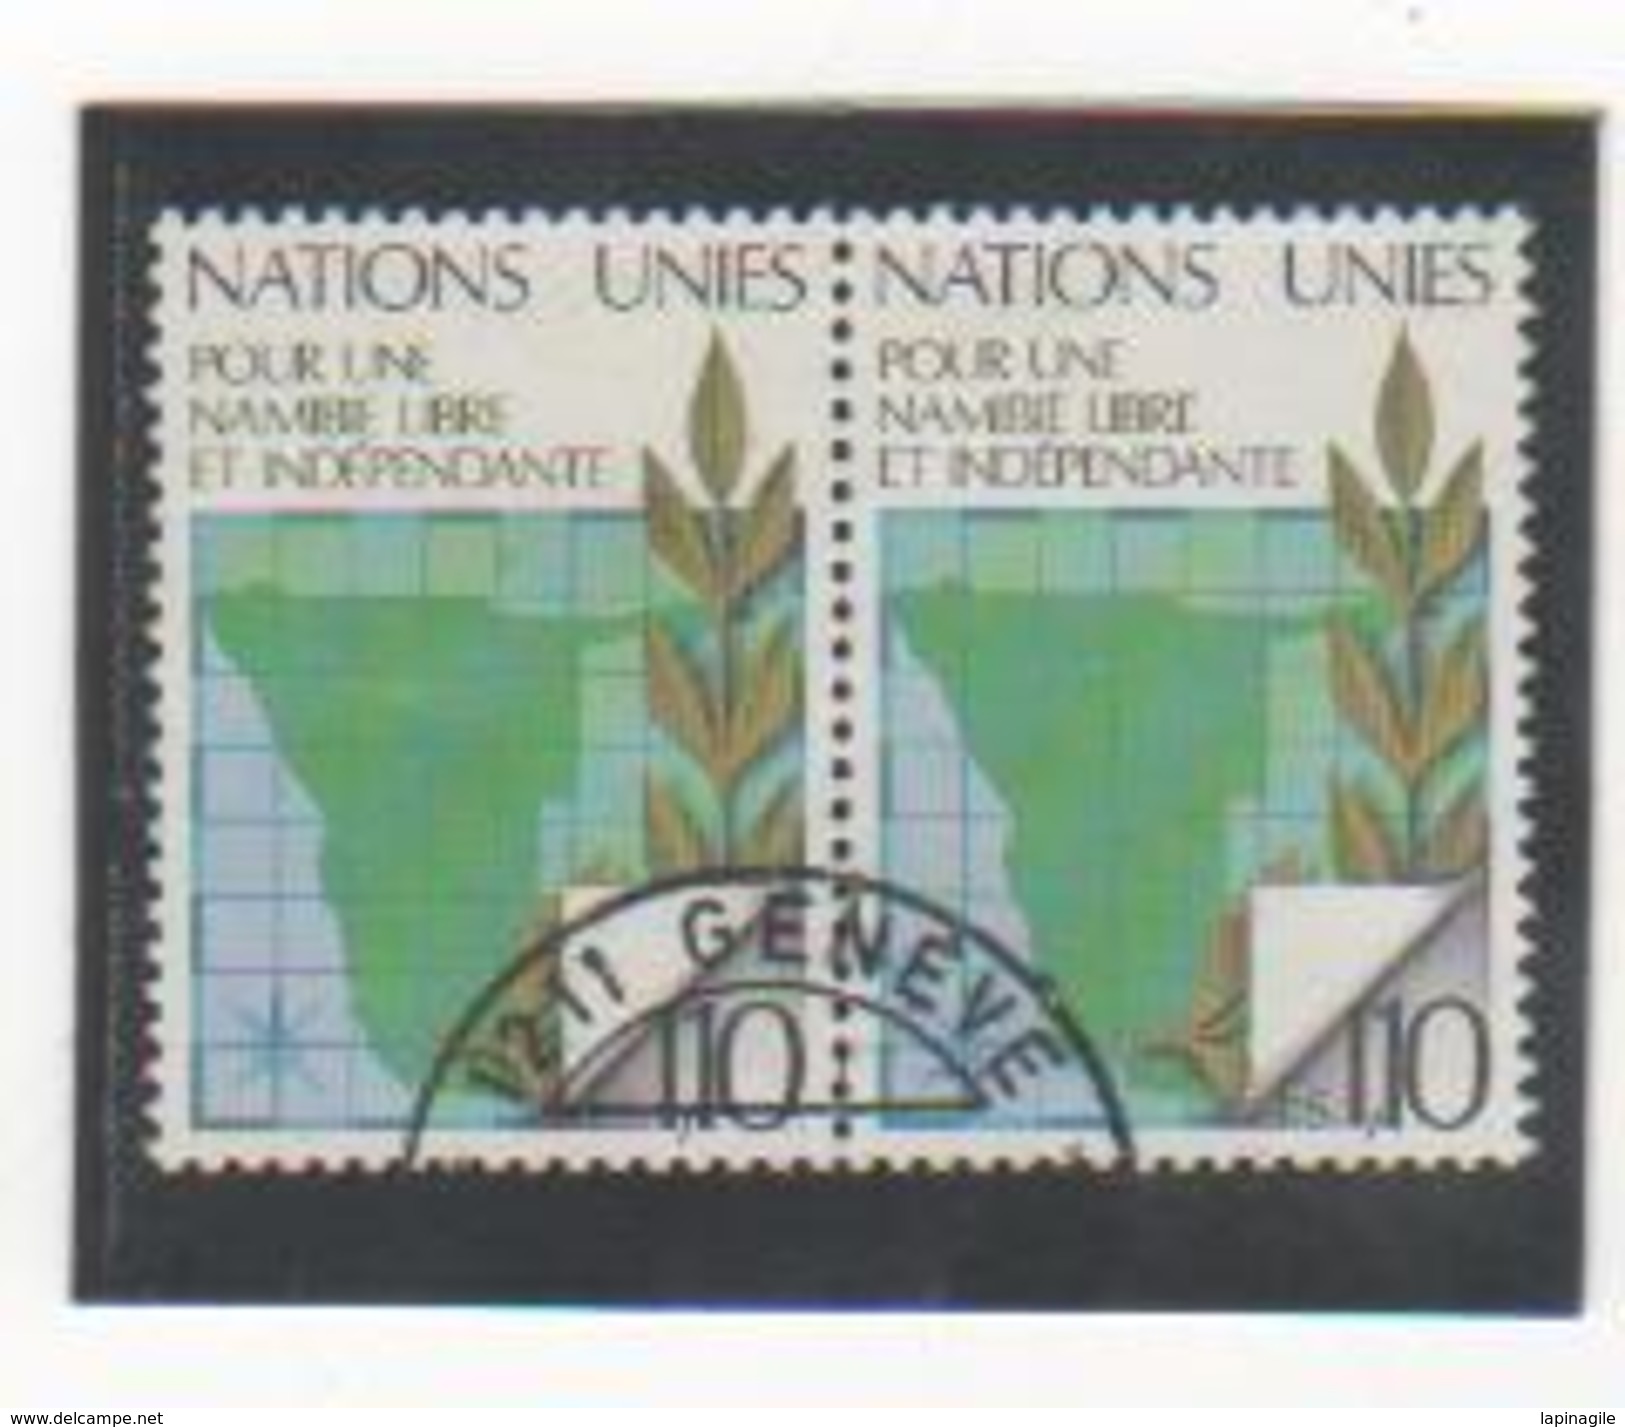 NATIONS UNIES GENEVE 1979 YT N° 85 Oblitéré Paire - Used Stamps